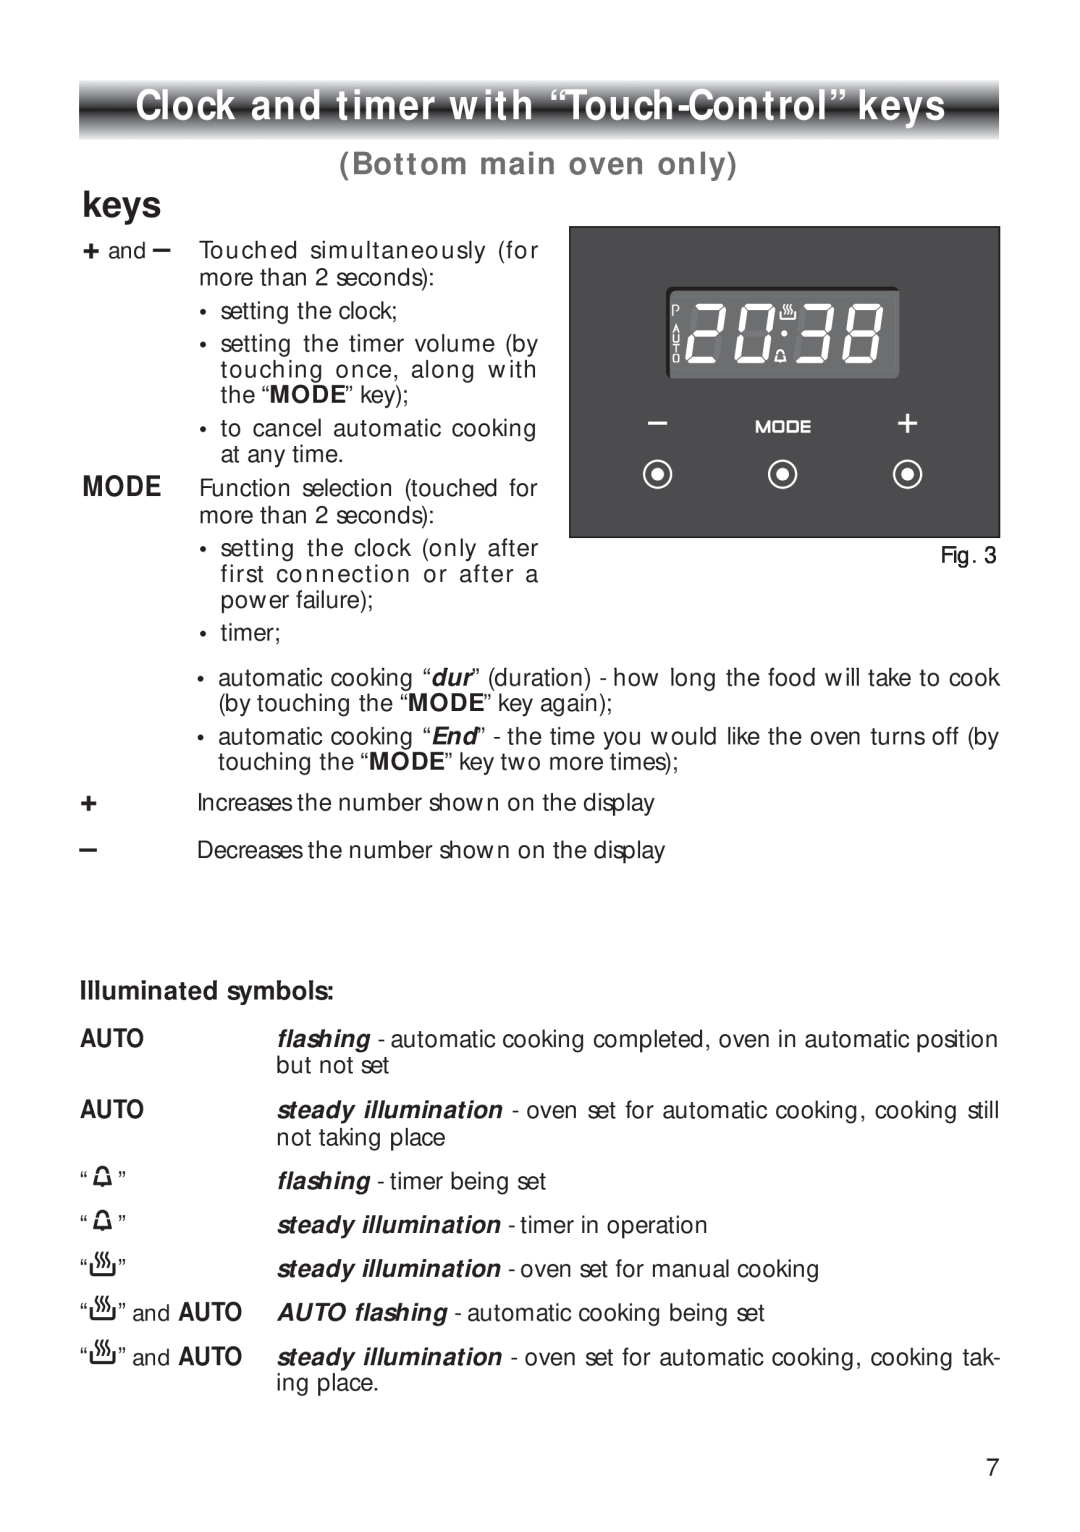 CDA RV 700 installation instructions Clock and timer with “Touch-Control” keys, Bottom main oven only, Mode 